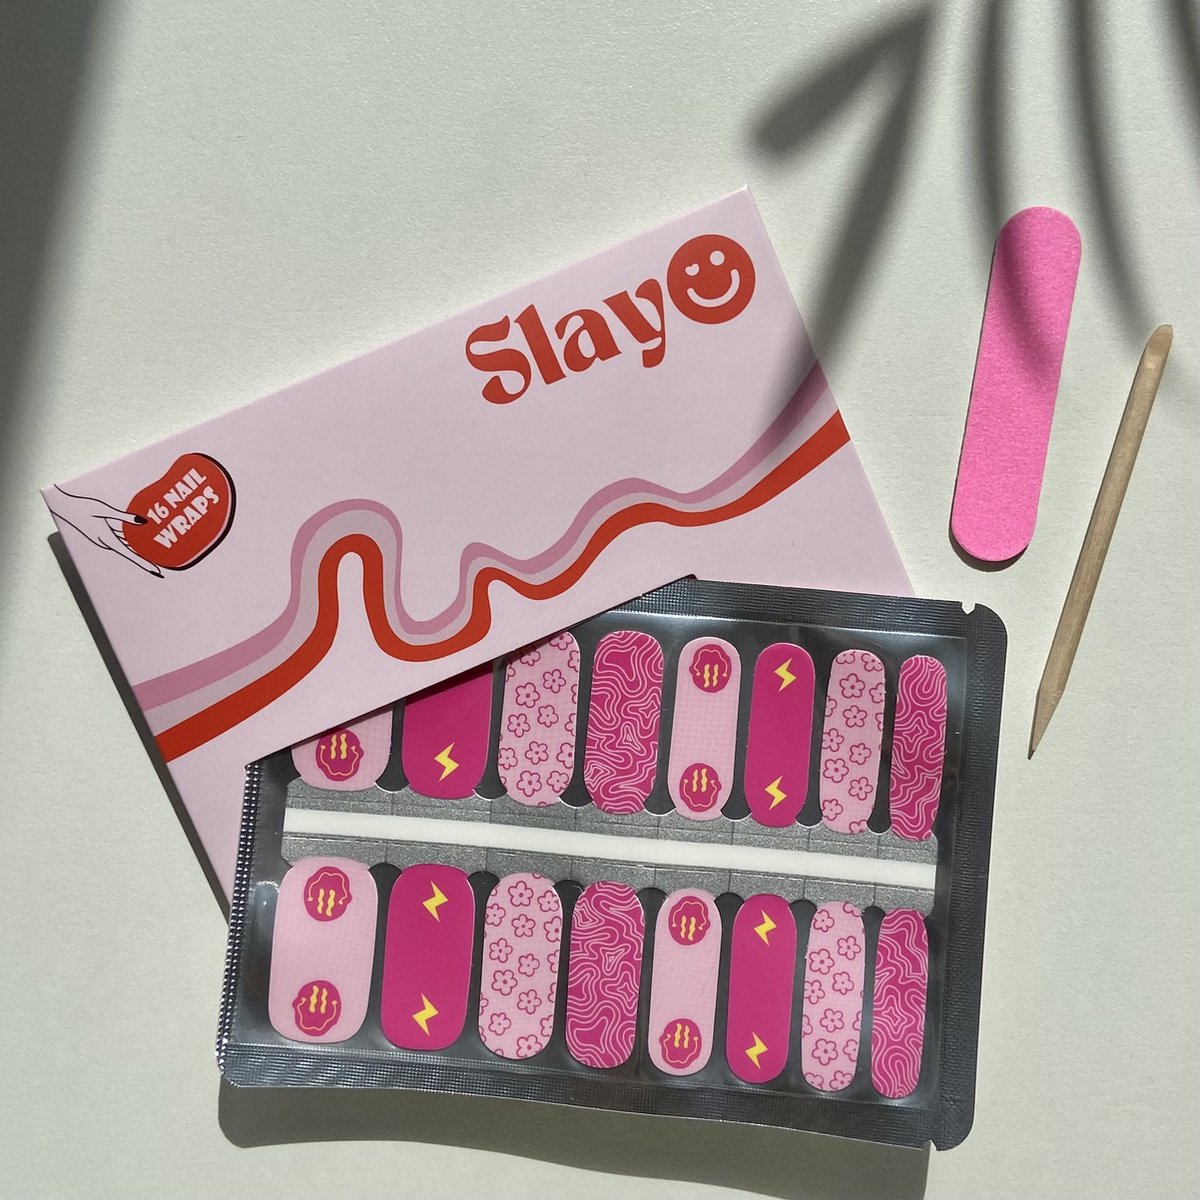 Slayo© - Nagelstickers - Electric Echoes - Nail Wraps - Nagel Stickers - Nail Stickers - Nail Art - Nail Wraps Sticker - Nail Art Stickers - Nagelfolie - GEEN lamp nodig